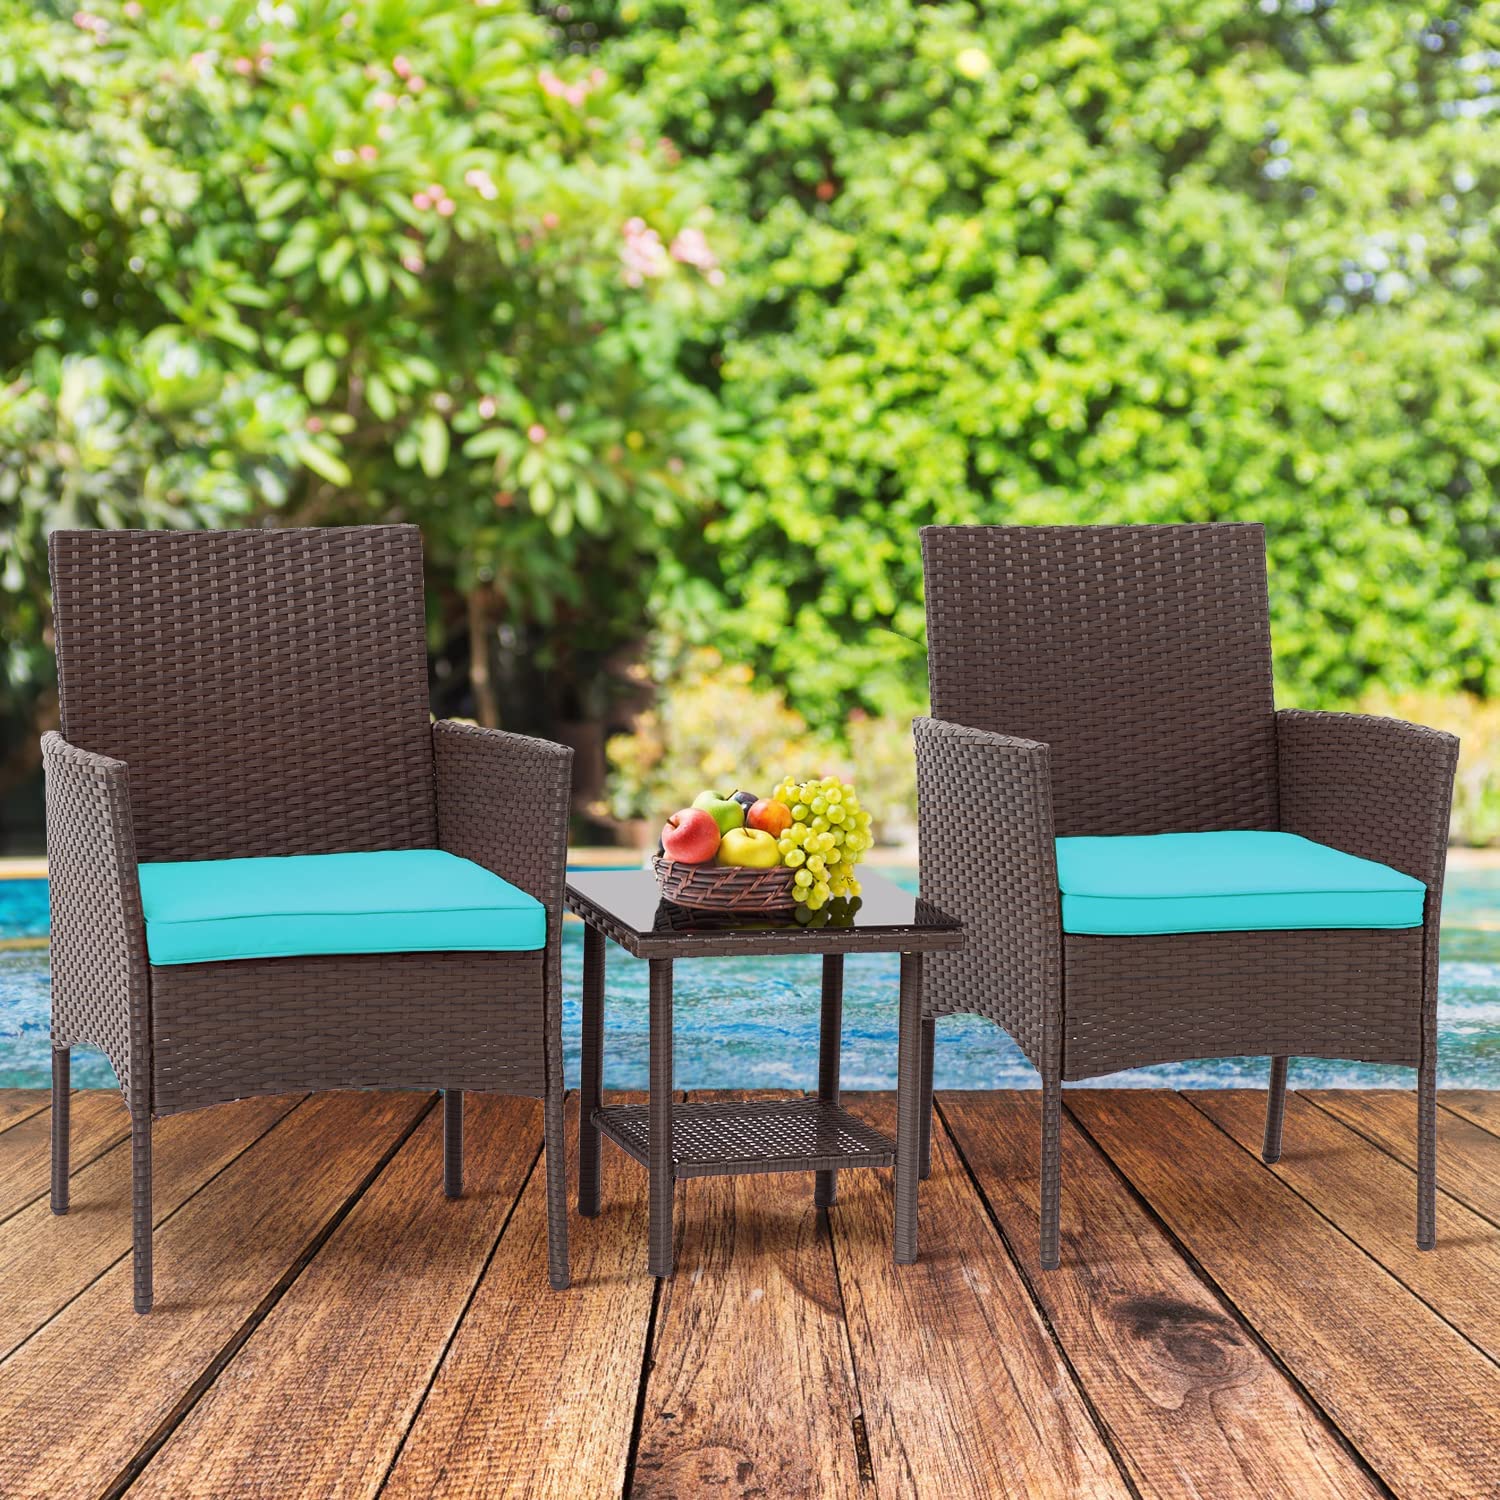 3 Piece Outdoor Furniture Set Patio Brown Wicker Chairs Furniture Bistro Conversation Set 2 Rattan Chairs with Blue Cushions and Glass Coffee Table for Porch Lawn Garden Balcony Backyard - image 2 of 7